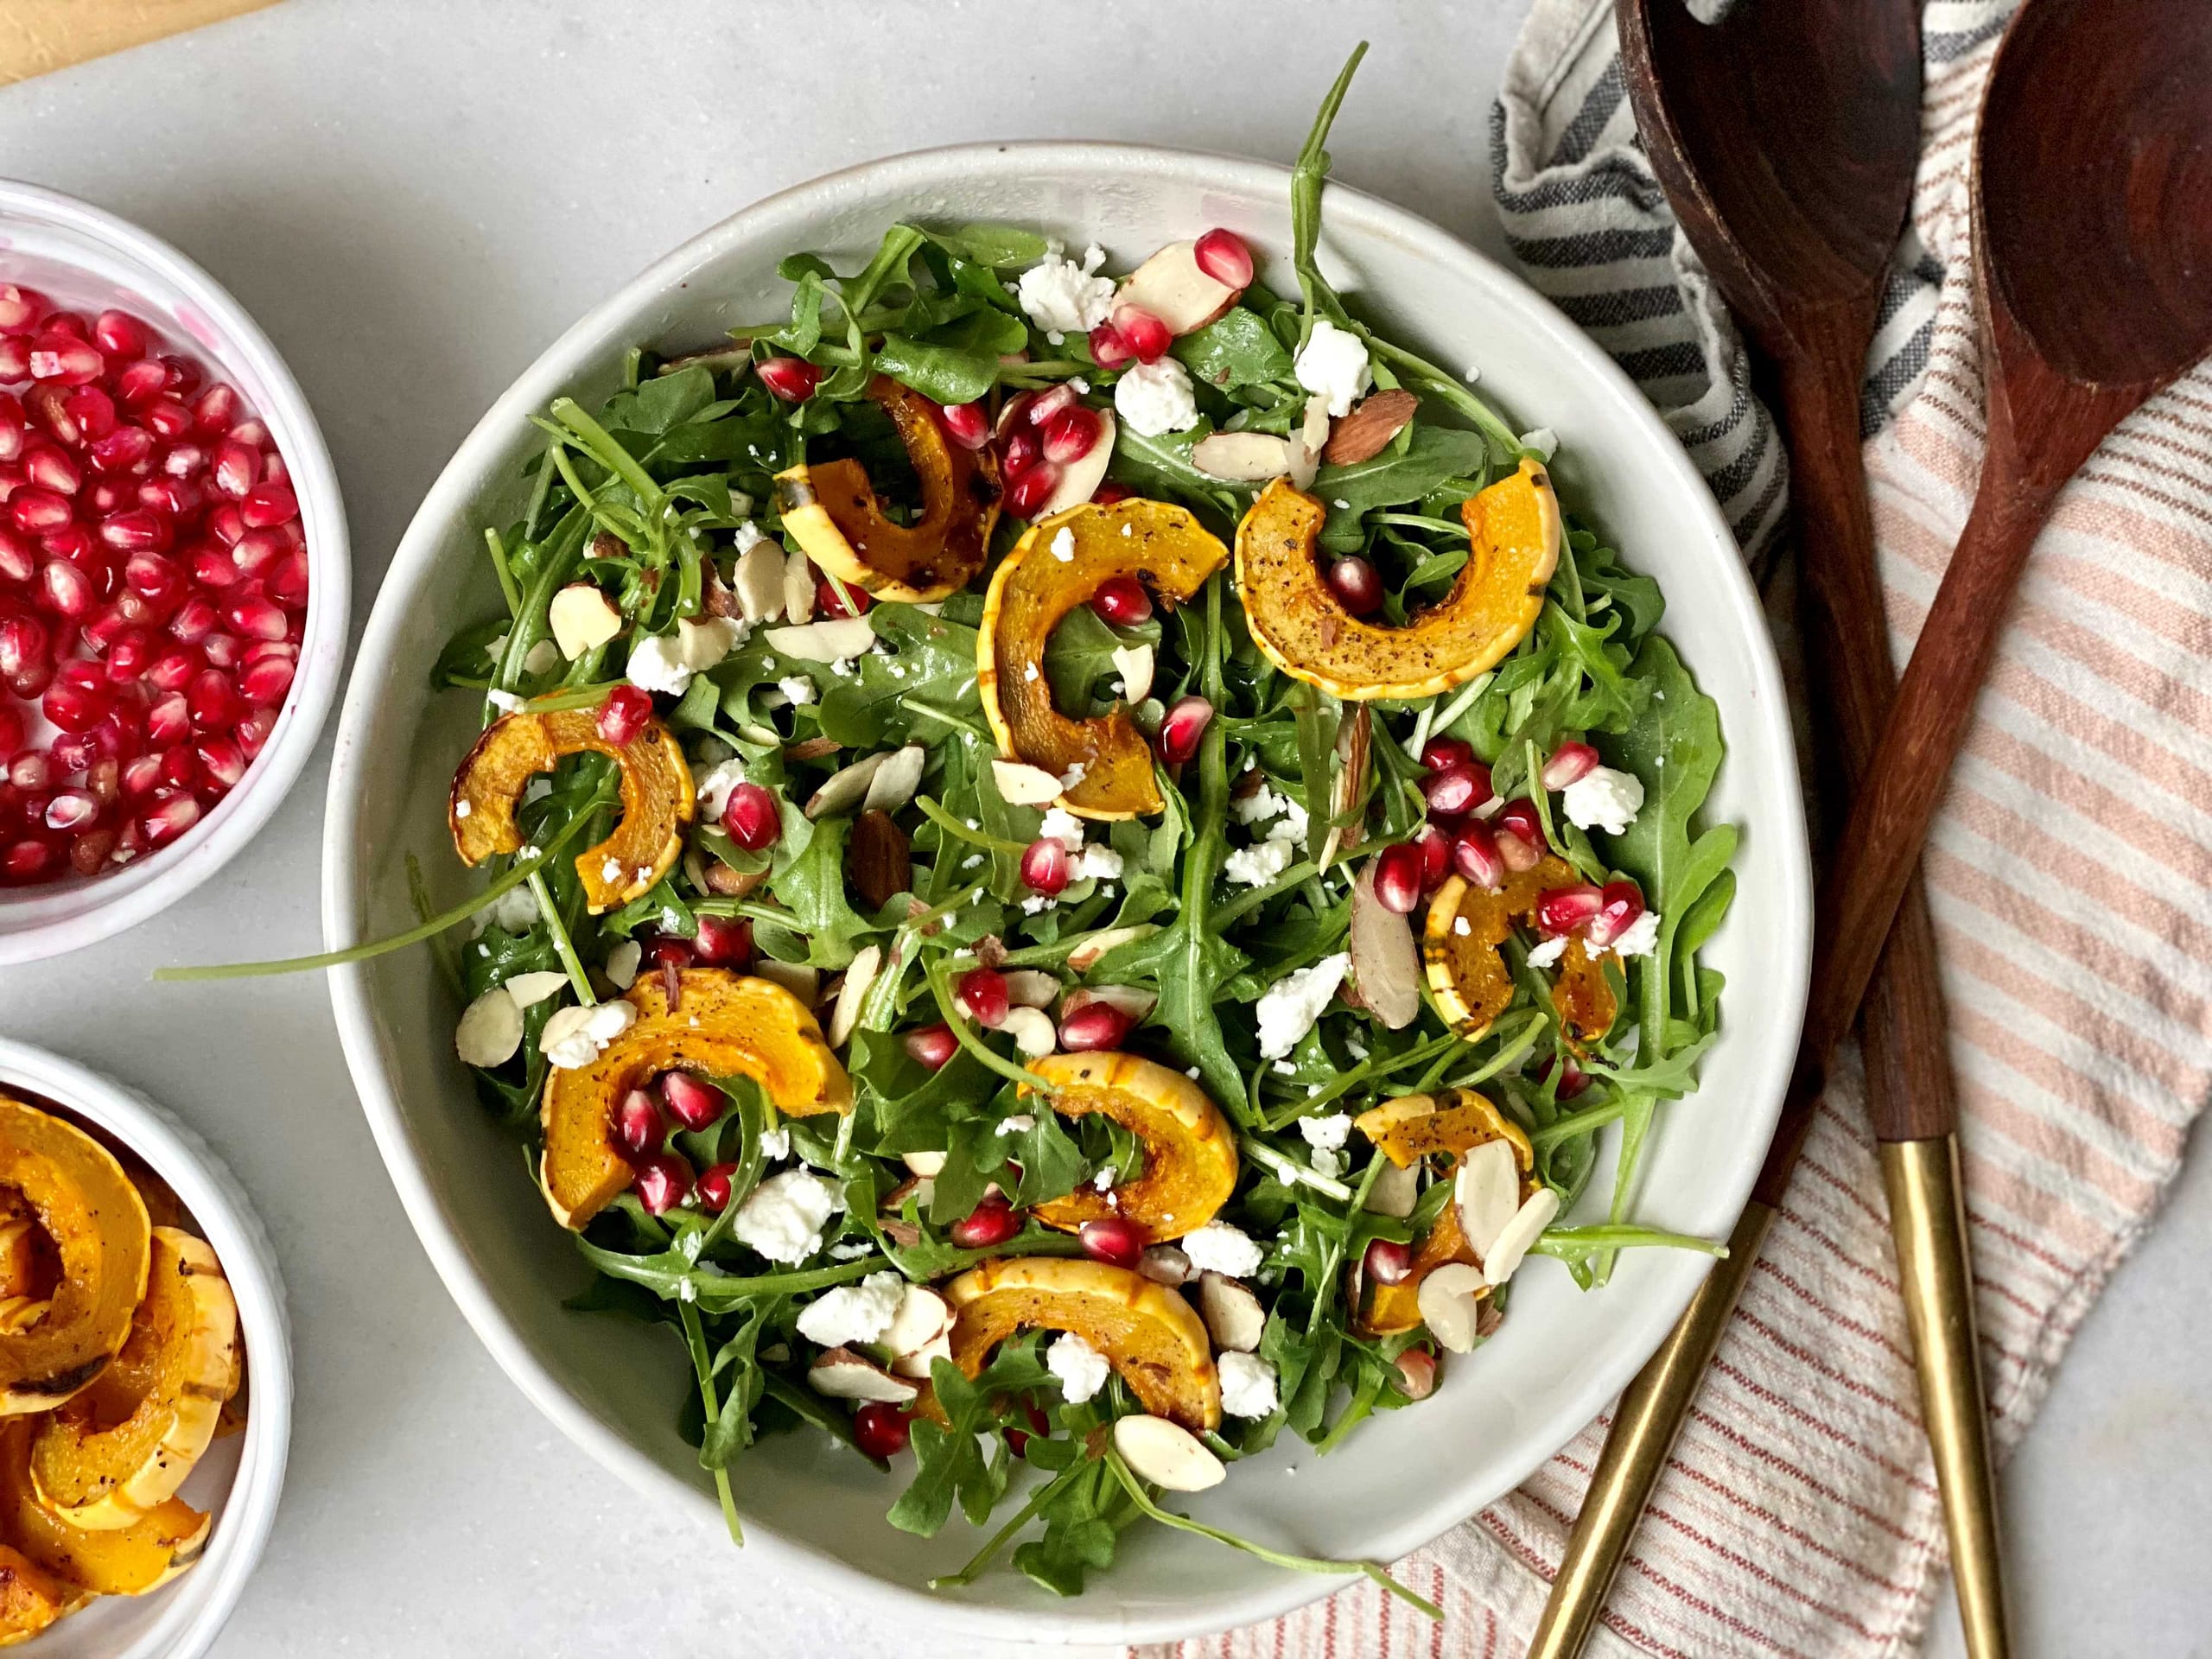 Delicata Squash Salad with Pomegranate, Almonds and Goat Cheese